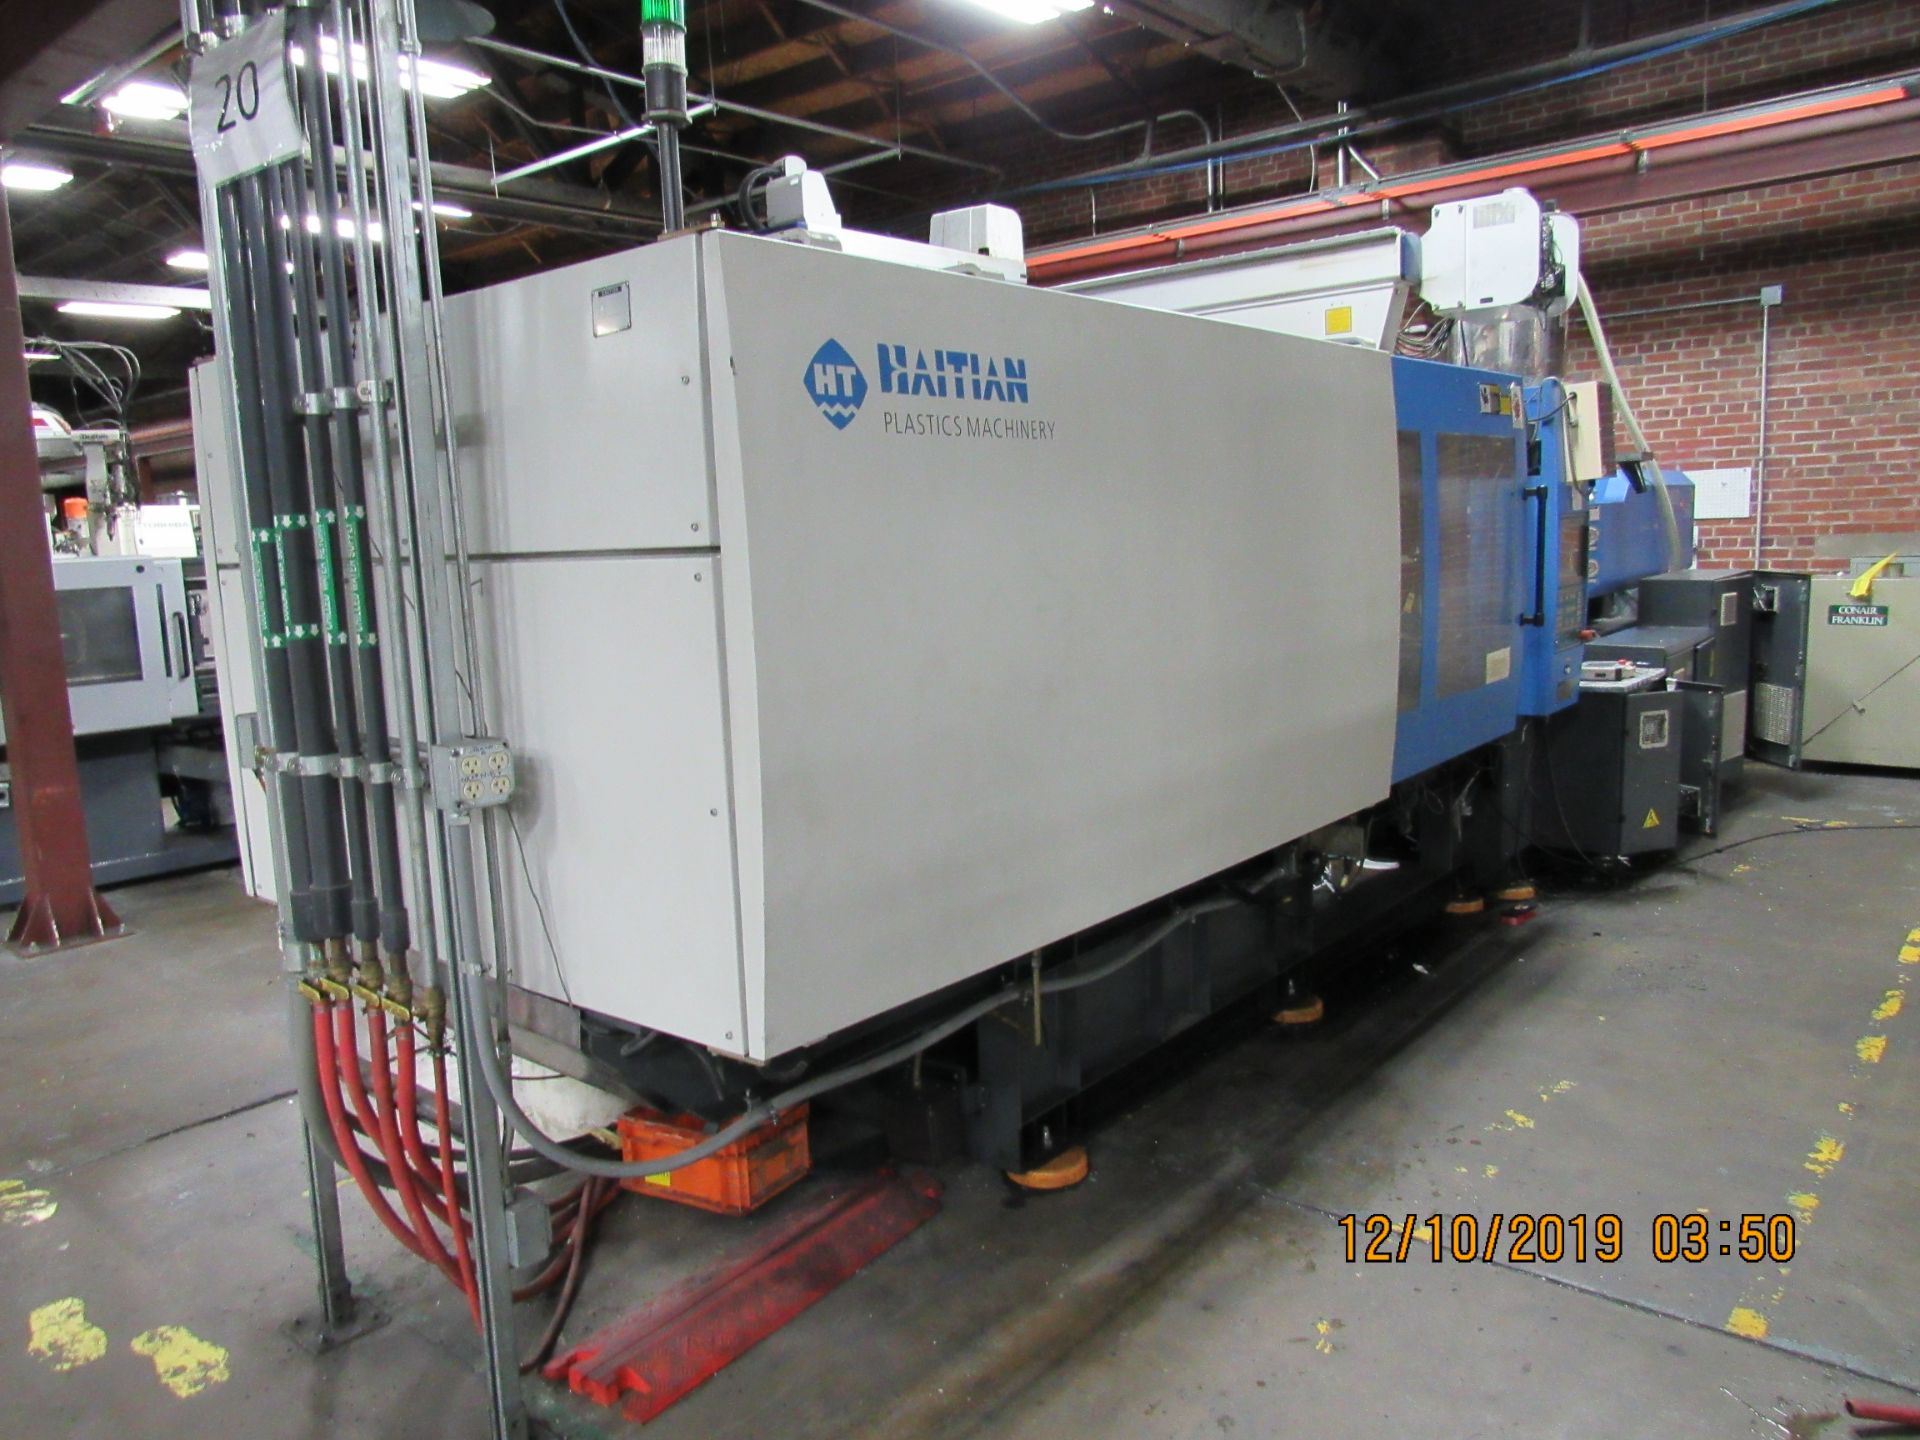 HAITIAN MA3800 MARS 2250 PLASTIC INJECTION MOLDING MACHINE; NEW IN 2010, S/N 201007038019070, - Image 2 of 5